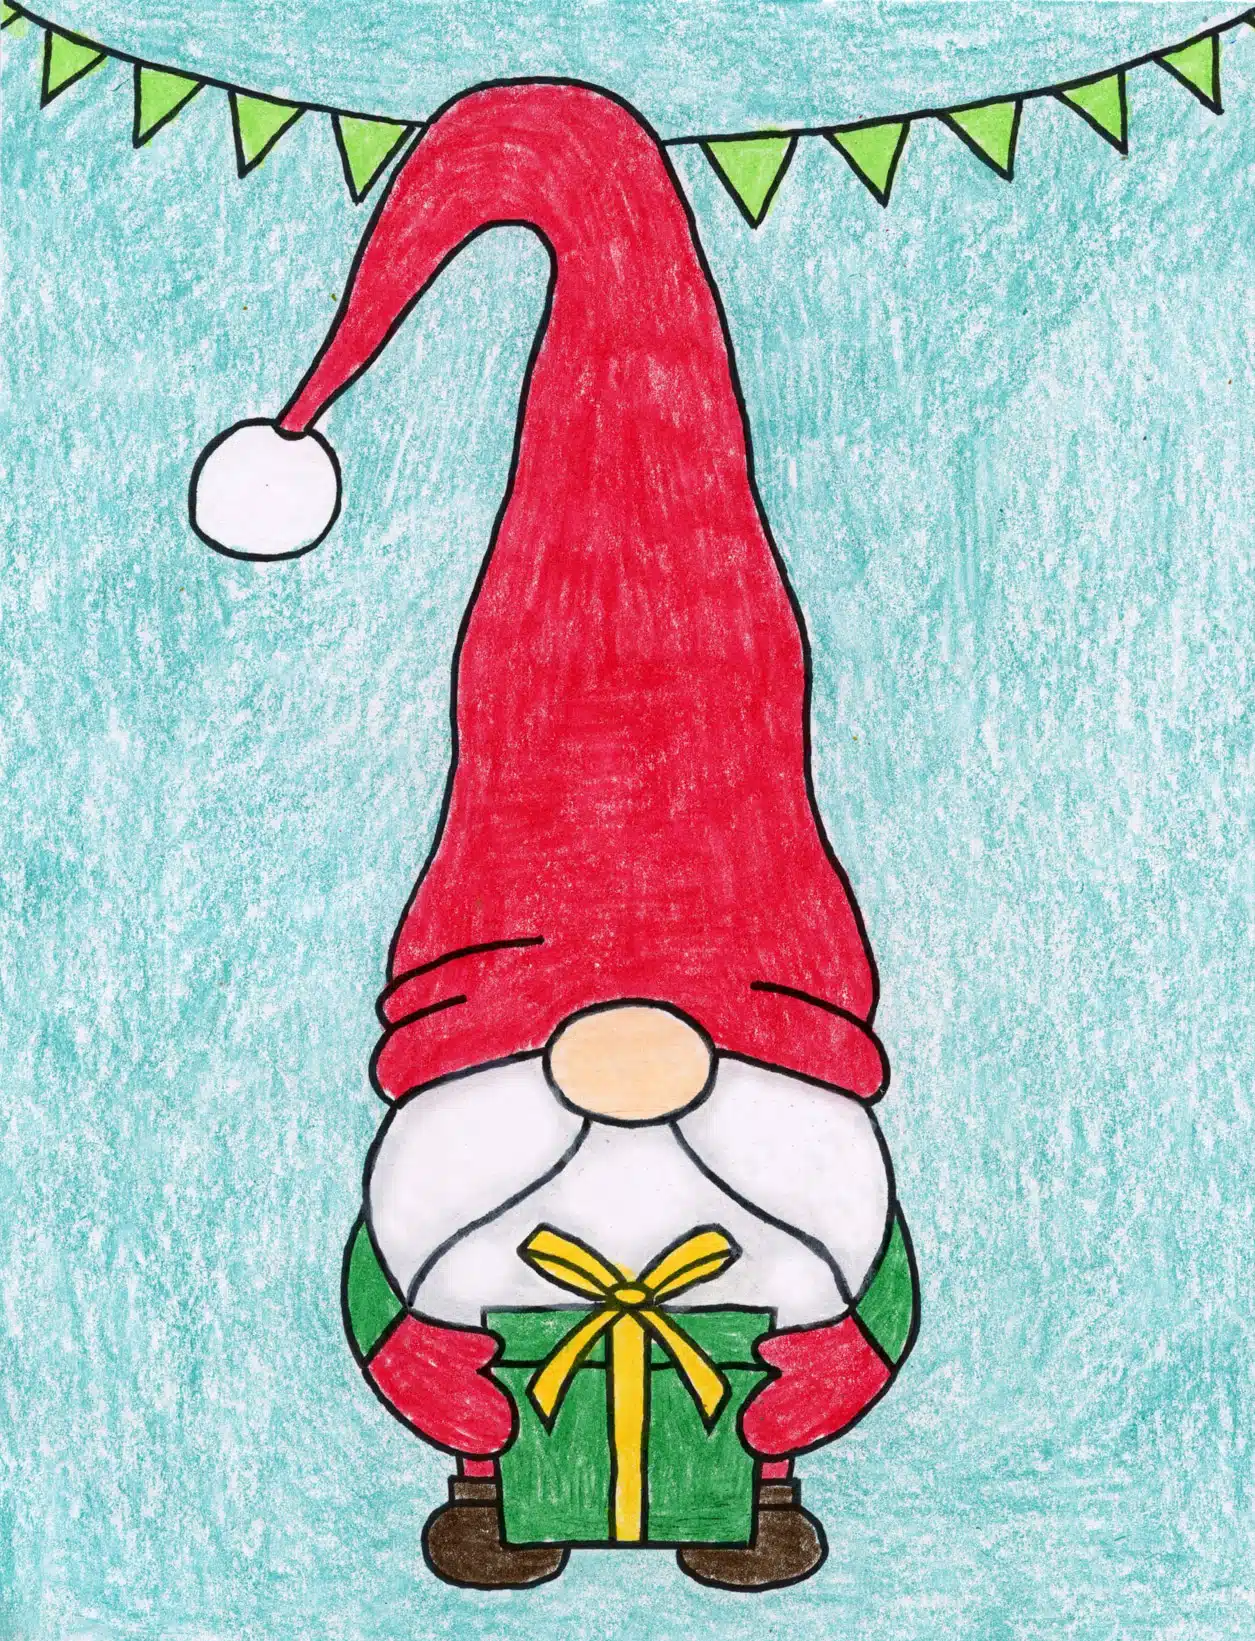 Easy How to Draw a Christmas Gnome Tutorial and Christmas Gnome Coloring Page